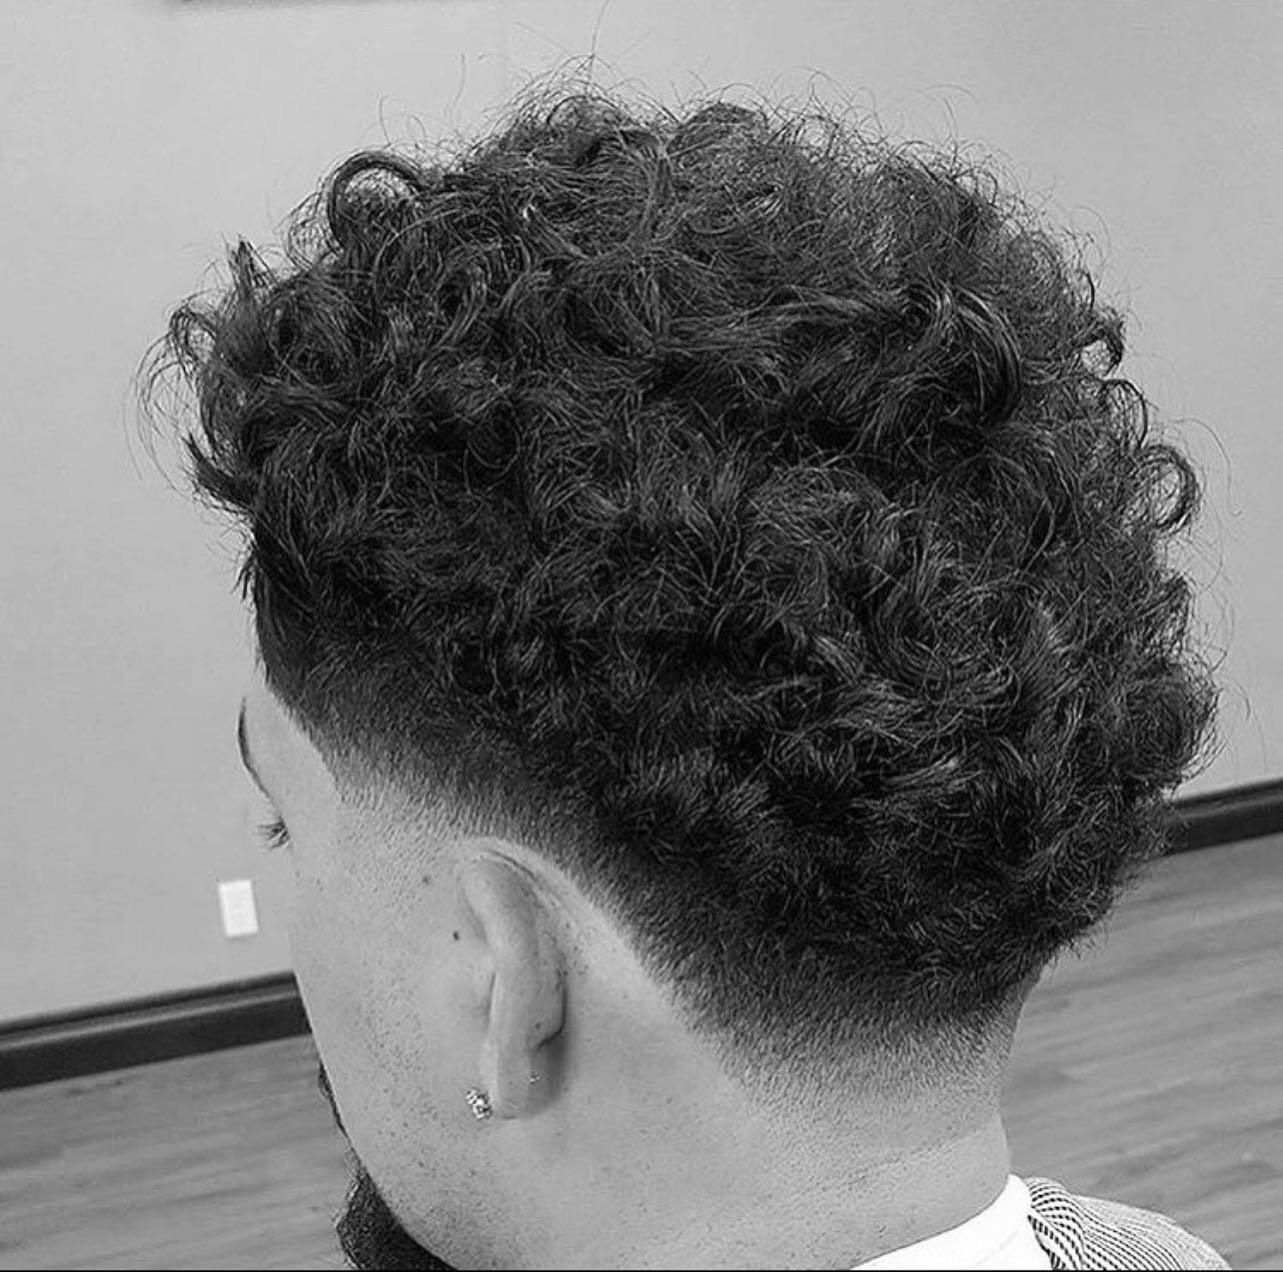 All styles can be done  by booking an appointment with Redthebarbersj.com

#sanjose#sanfrancisco#losangeles#newyork#fades#haircuts#tapers#lineups#barber#ybfb#yourbarbersfavoritebarber#mcblends